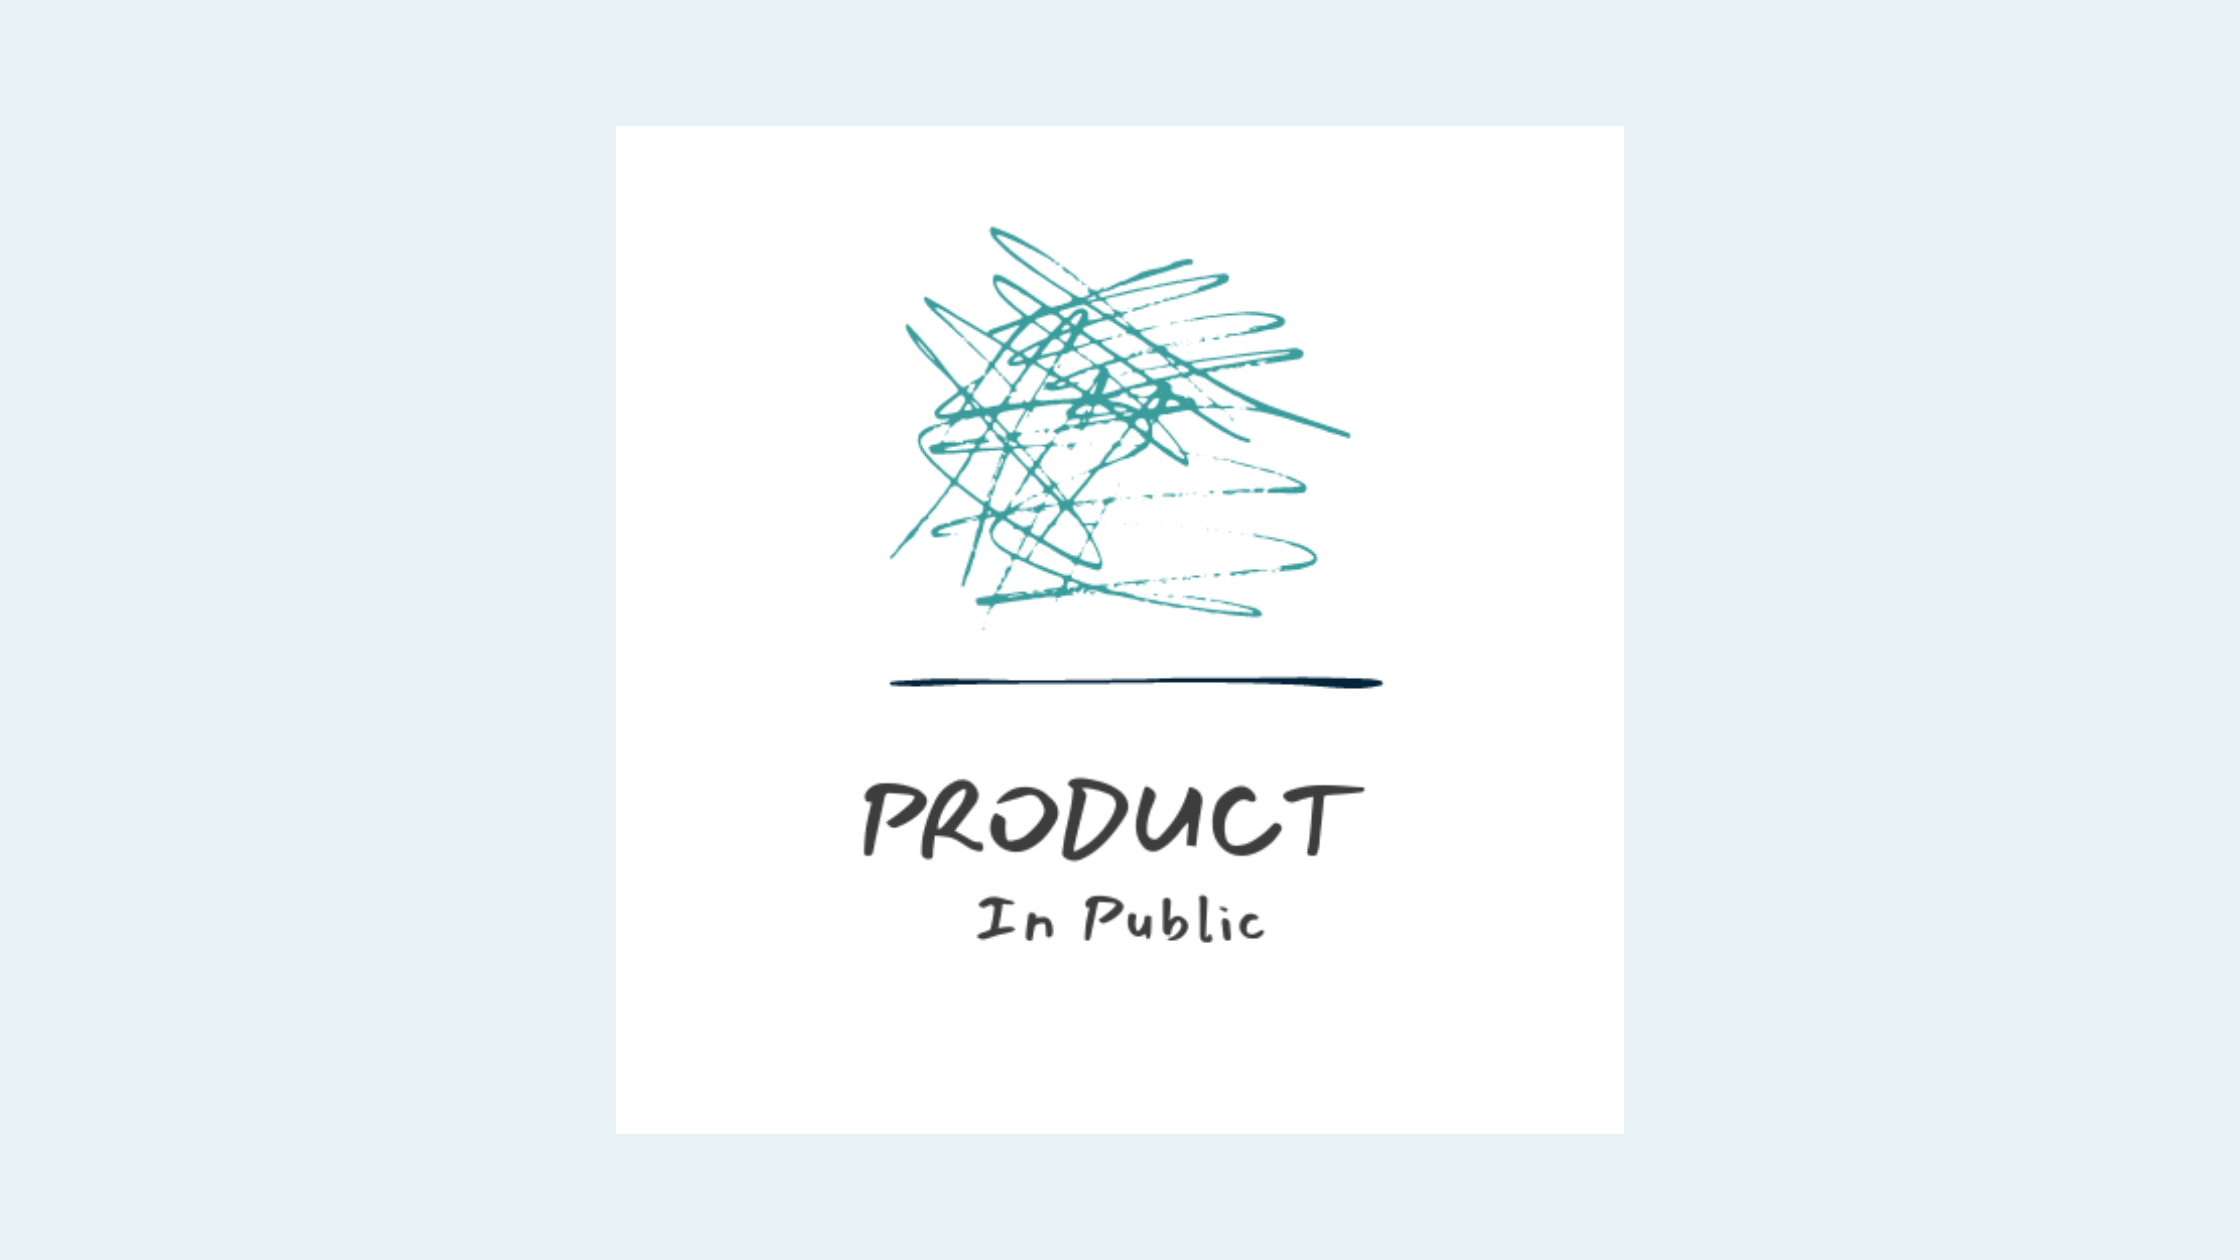 Introducing the Product in Public Newsletter on Jonathan Mills Patrick dot com